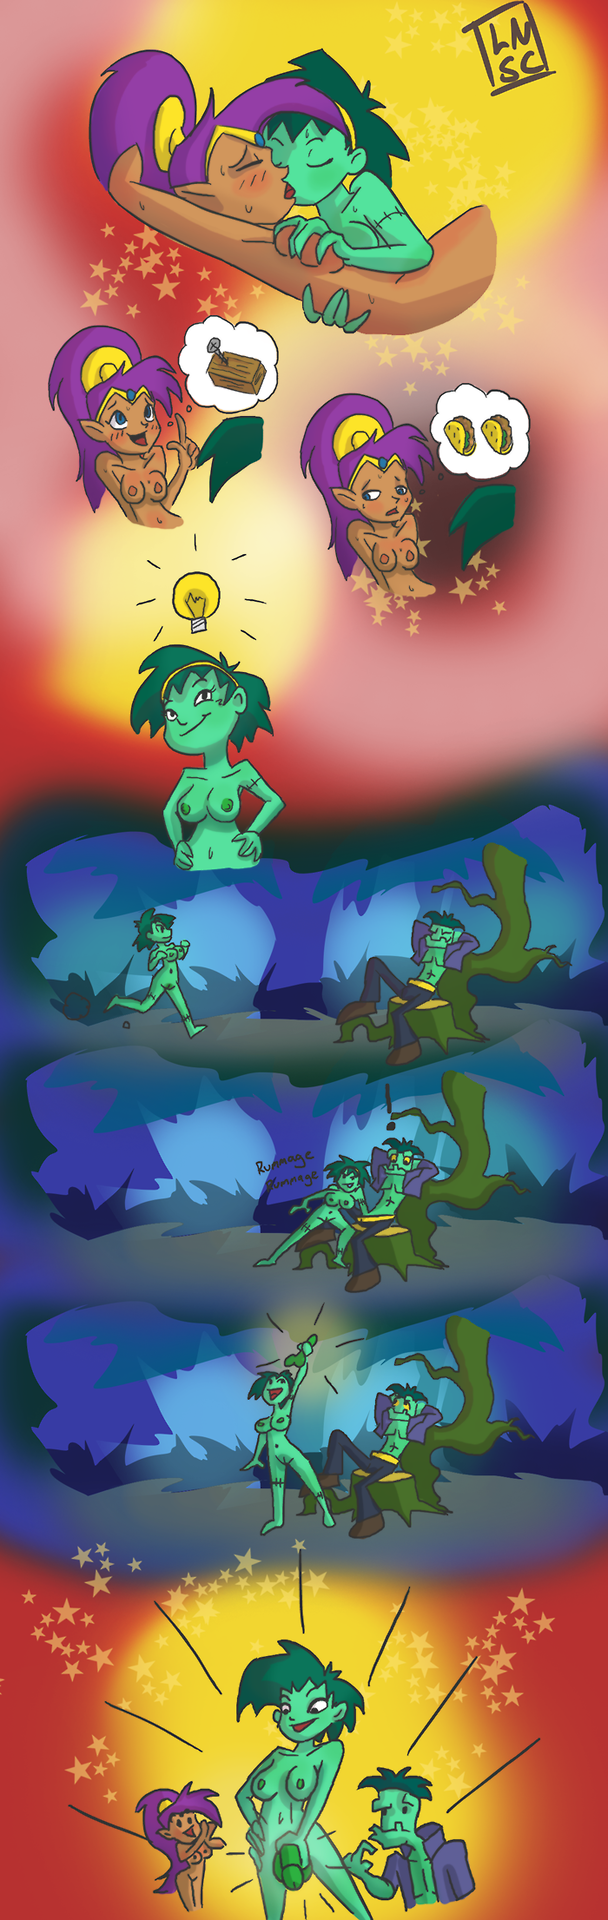 The S. reccomend shantae x rottytops